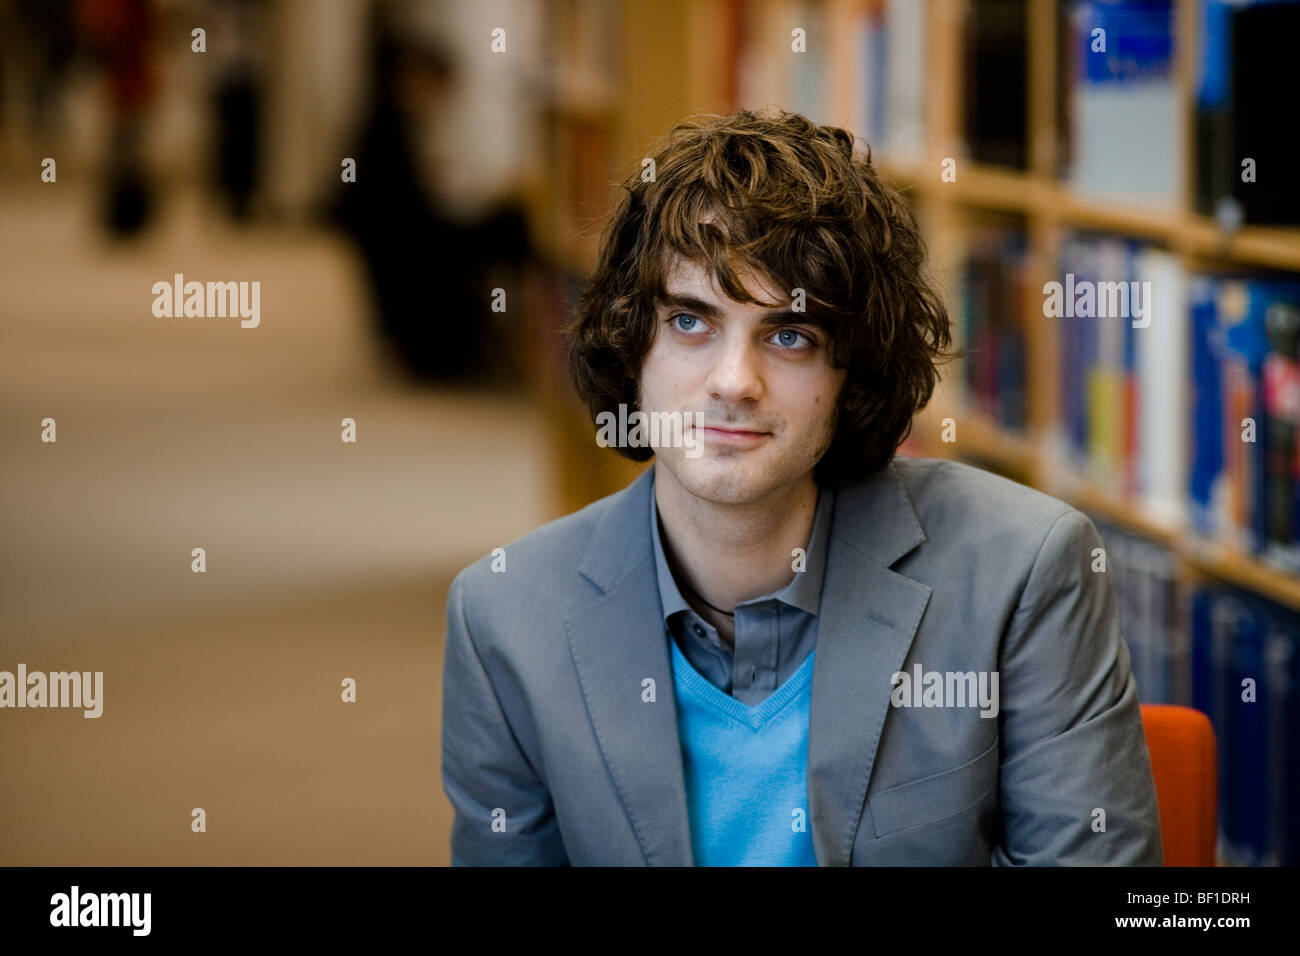 A male student in a library, Sweden. Stock Photo